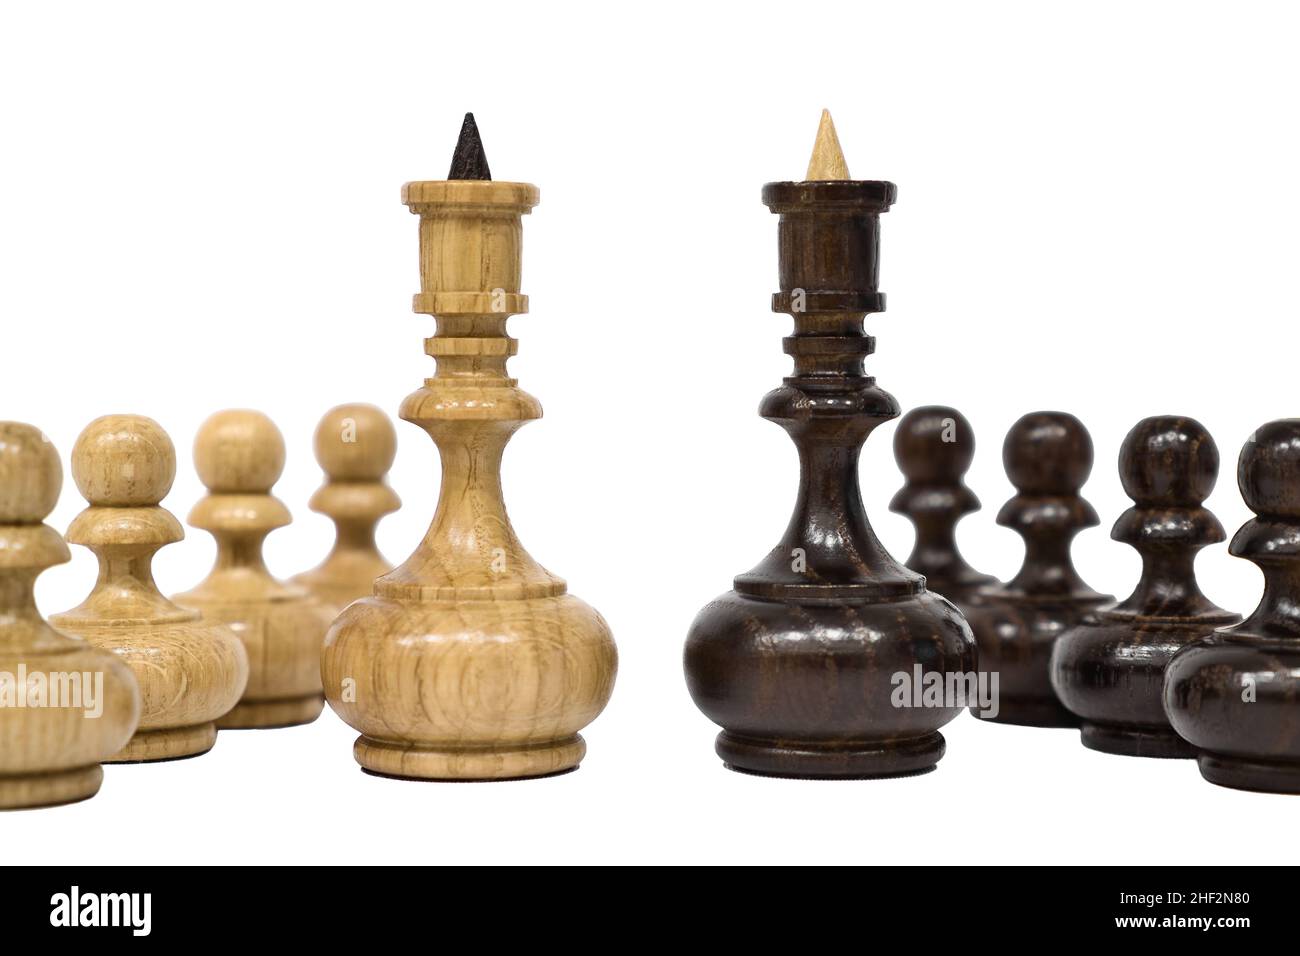 Chess pieces isolated on white background. White and black chess kings with pawns stands in front of each other. Competition and confrontation concept Stock Photo